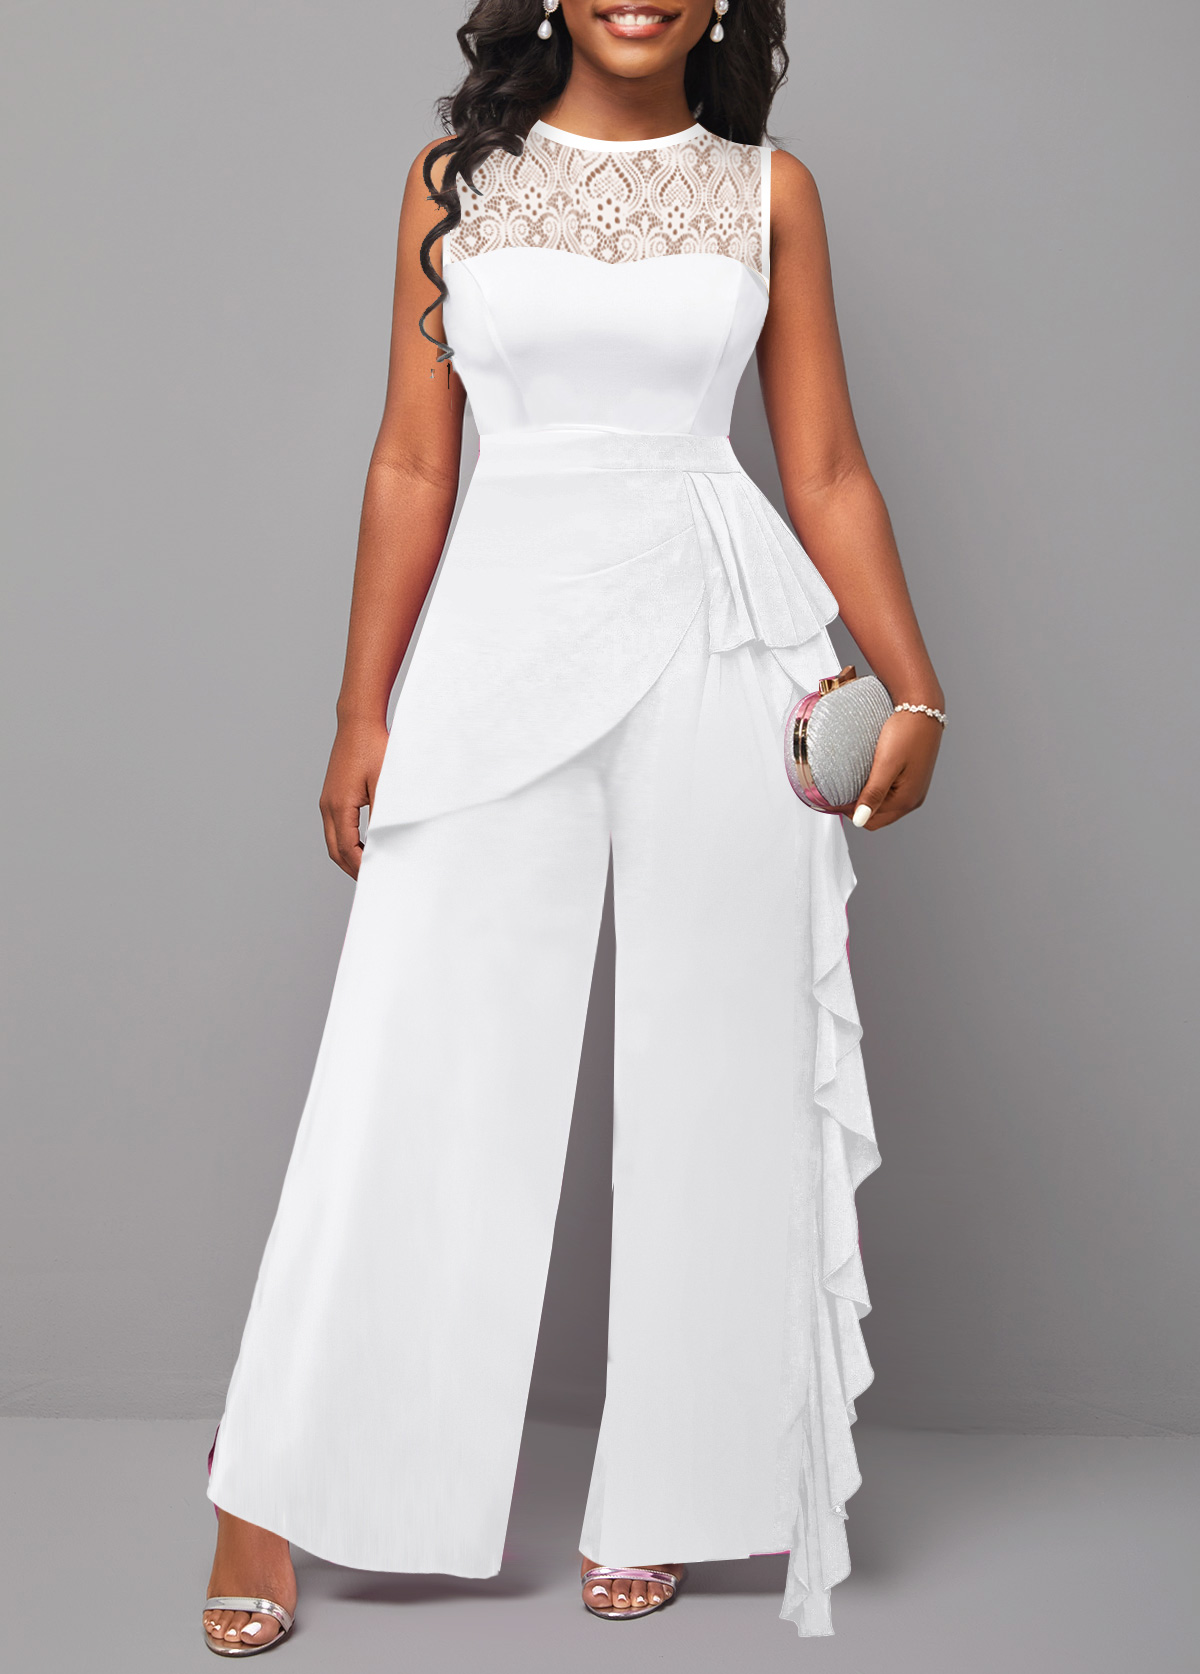 Lace Patchwork White Long Sleeveless Jumpsuit | Rosewe.com - USD $37.98